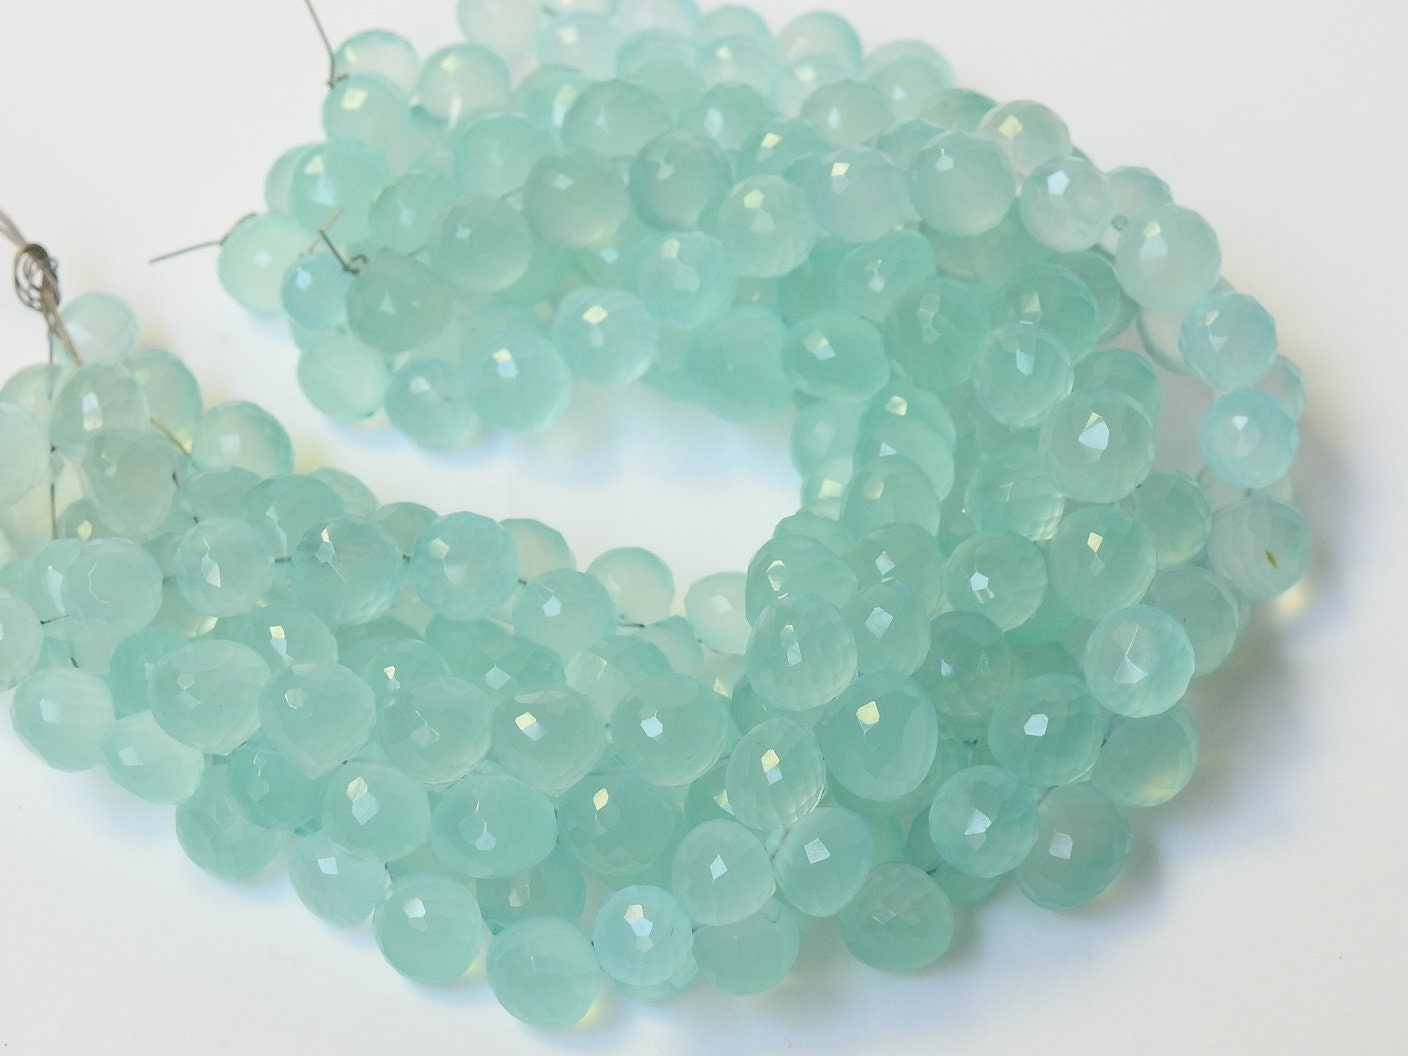 Aqua Blue Chalcedony Faceted Onion Shape,Drop,Teardrop,Briolettes 4Inch Strand 8X8To6X6MM Approx,Wholesaler,Supplies,New Arrivals PME-CY2 | Save 33% - Rajasthan Living 17